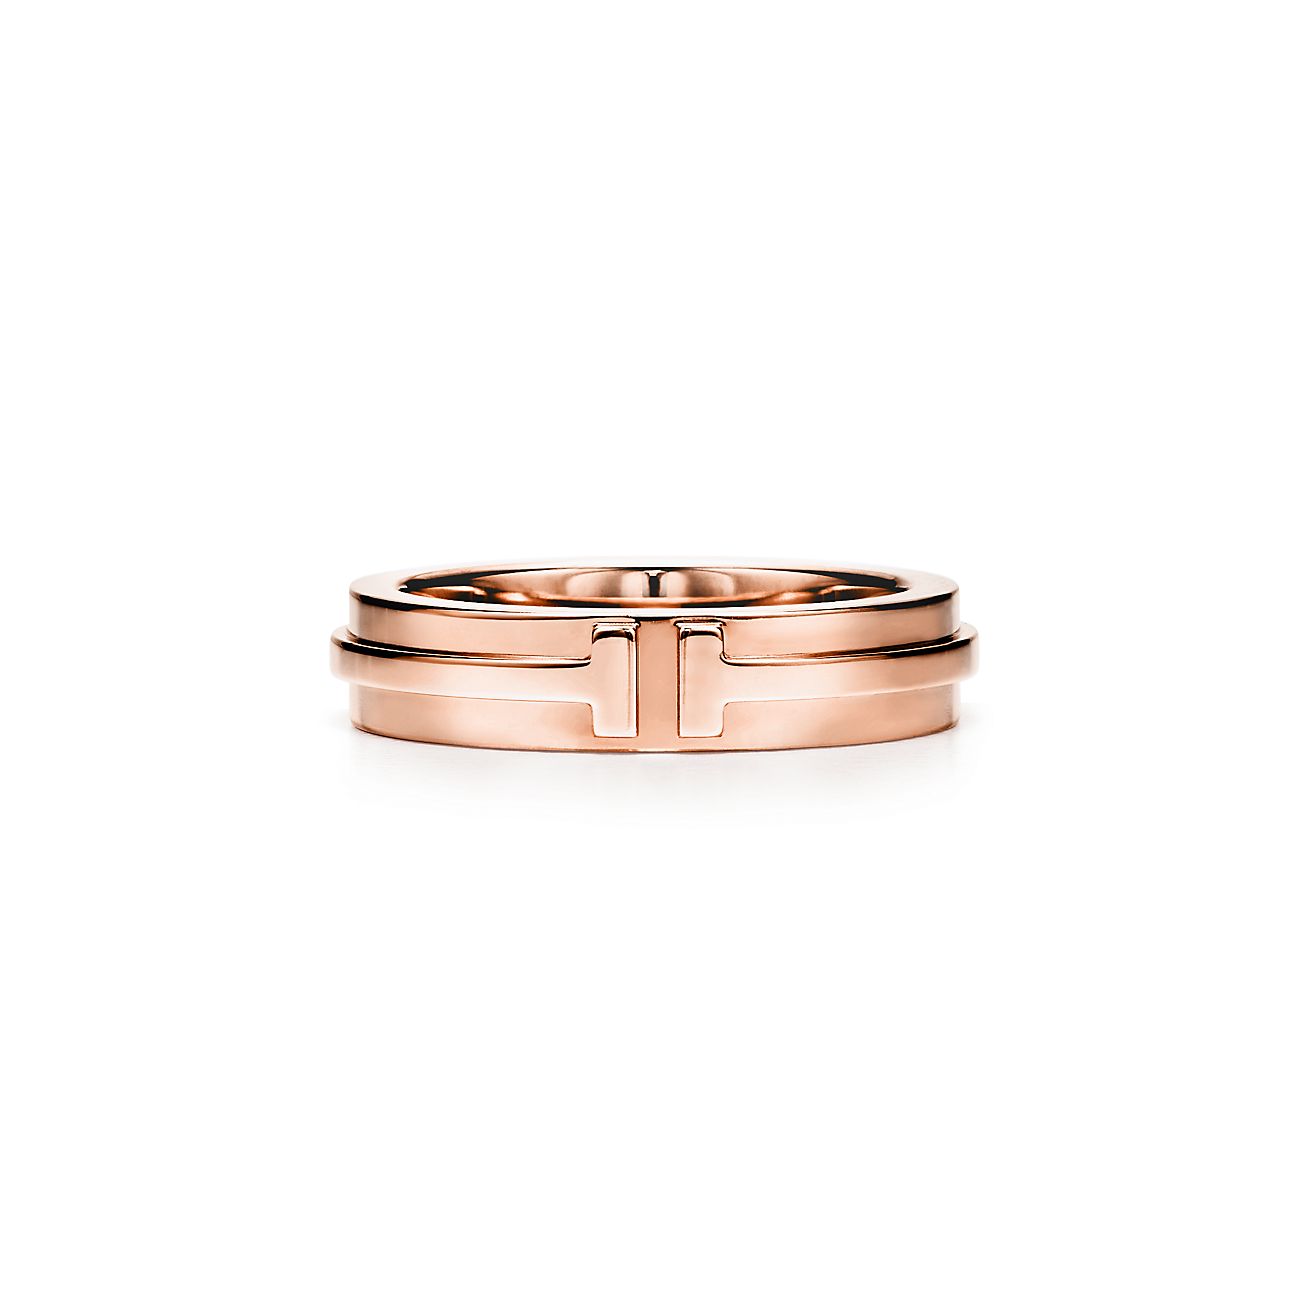 Tiffany T narrow ring in 18k rose gold, 4.5 mm wide. | Tiffany & Co.